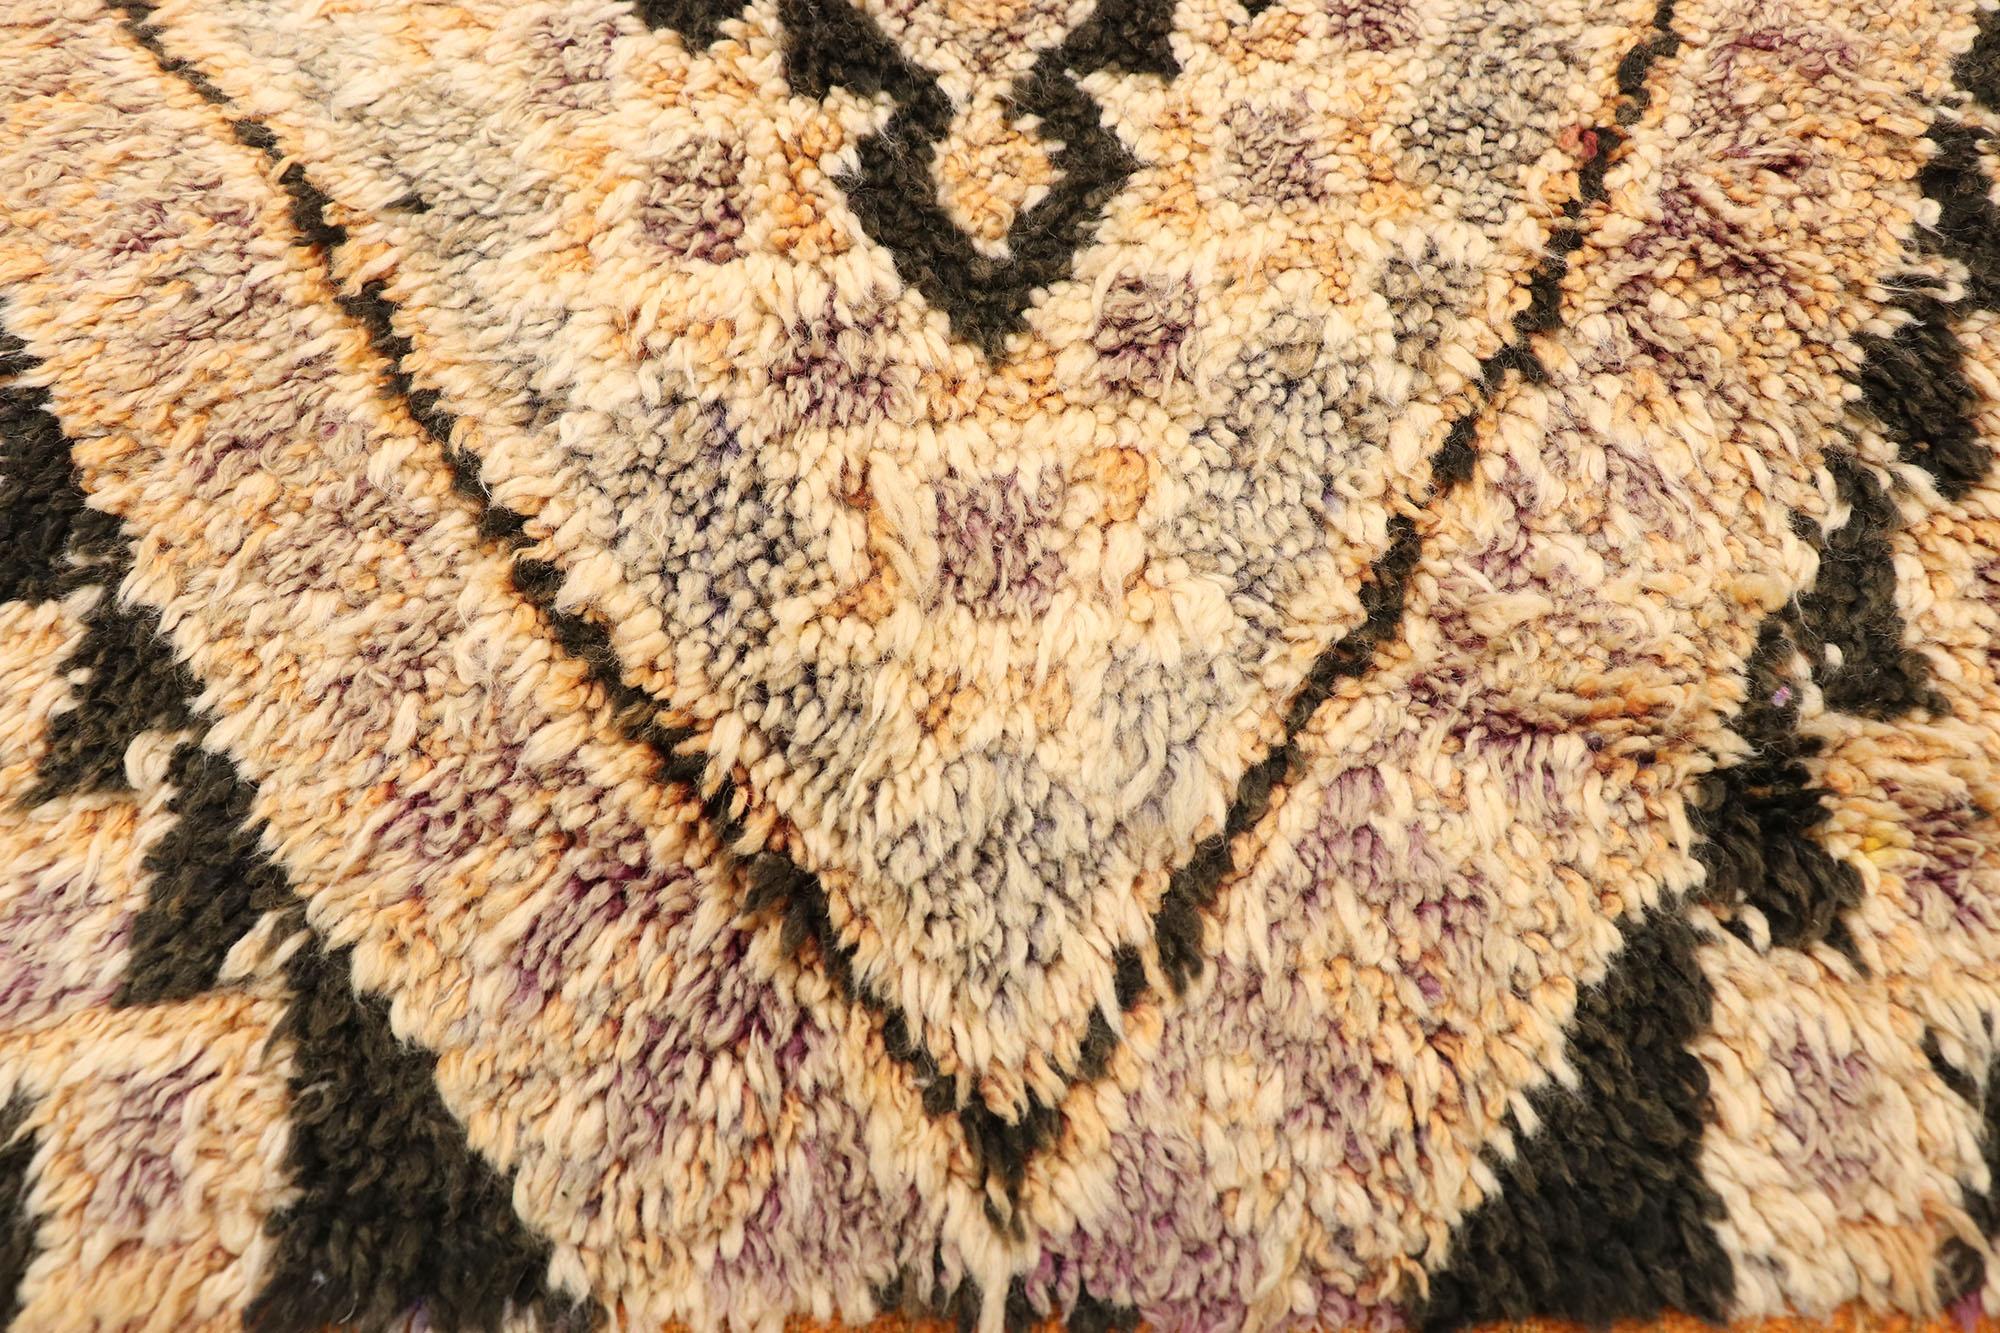 Vintage Brown Beni MGuild Moroccan Rug, Earthy Boho Chic Meets Midcentury In Good Condition For Sale In Dallas, TX